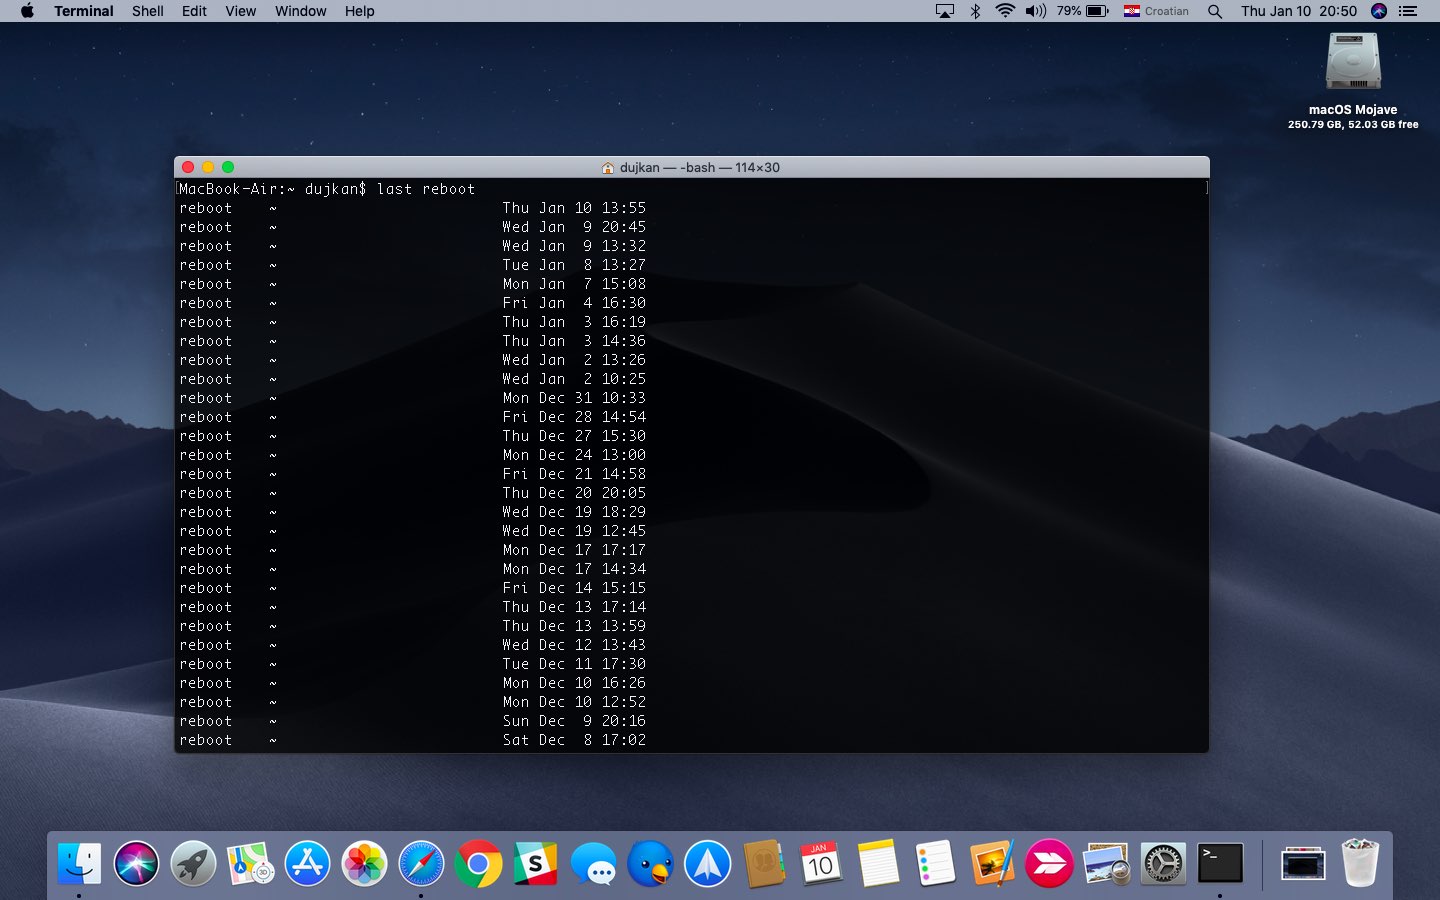 Mac Terminal showing a list of last reboot times